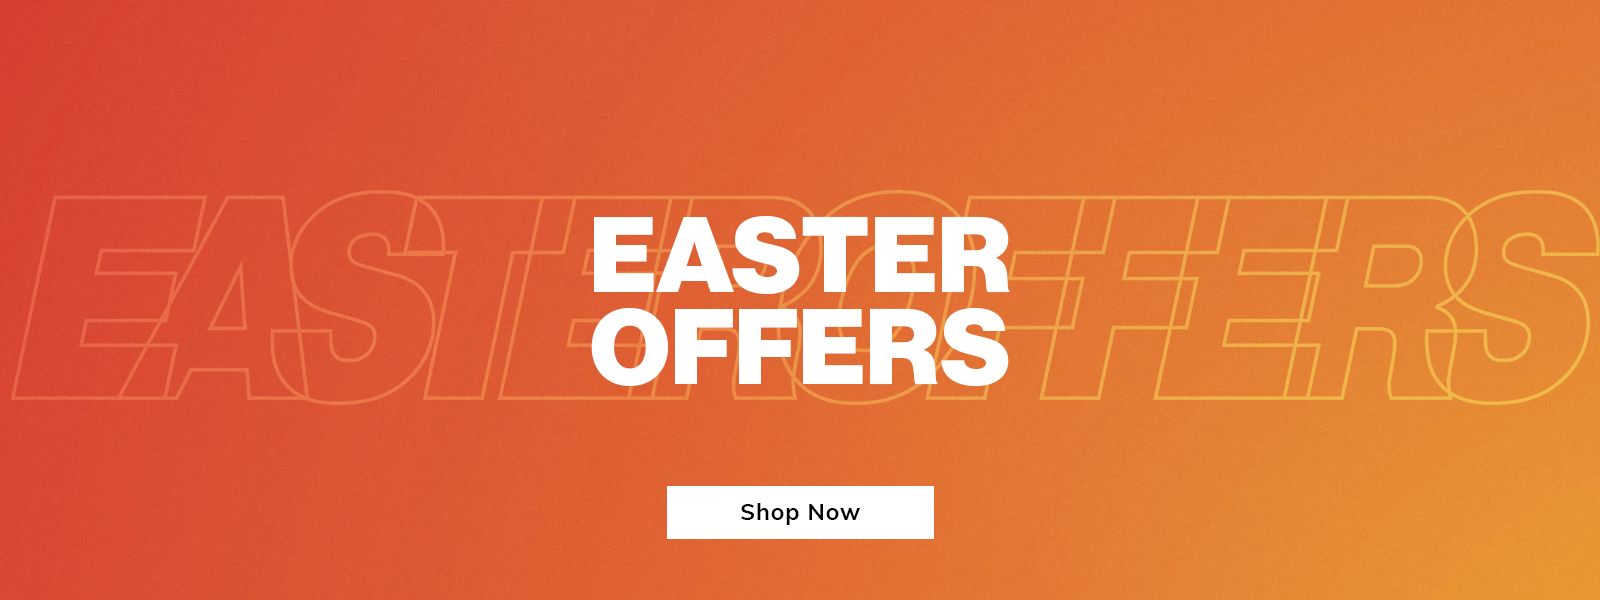 Easter Offers - Shop Now